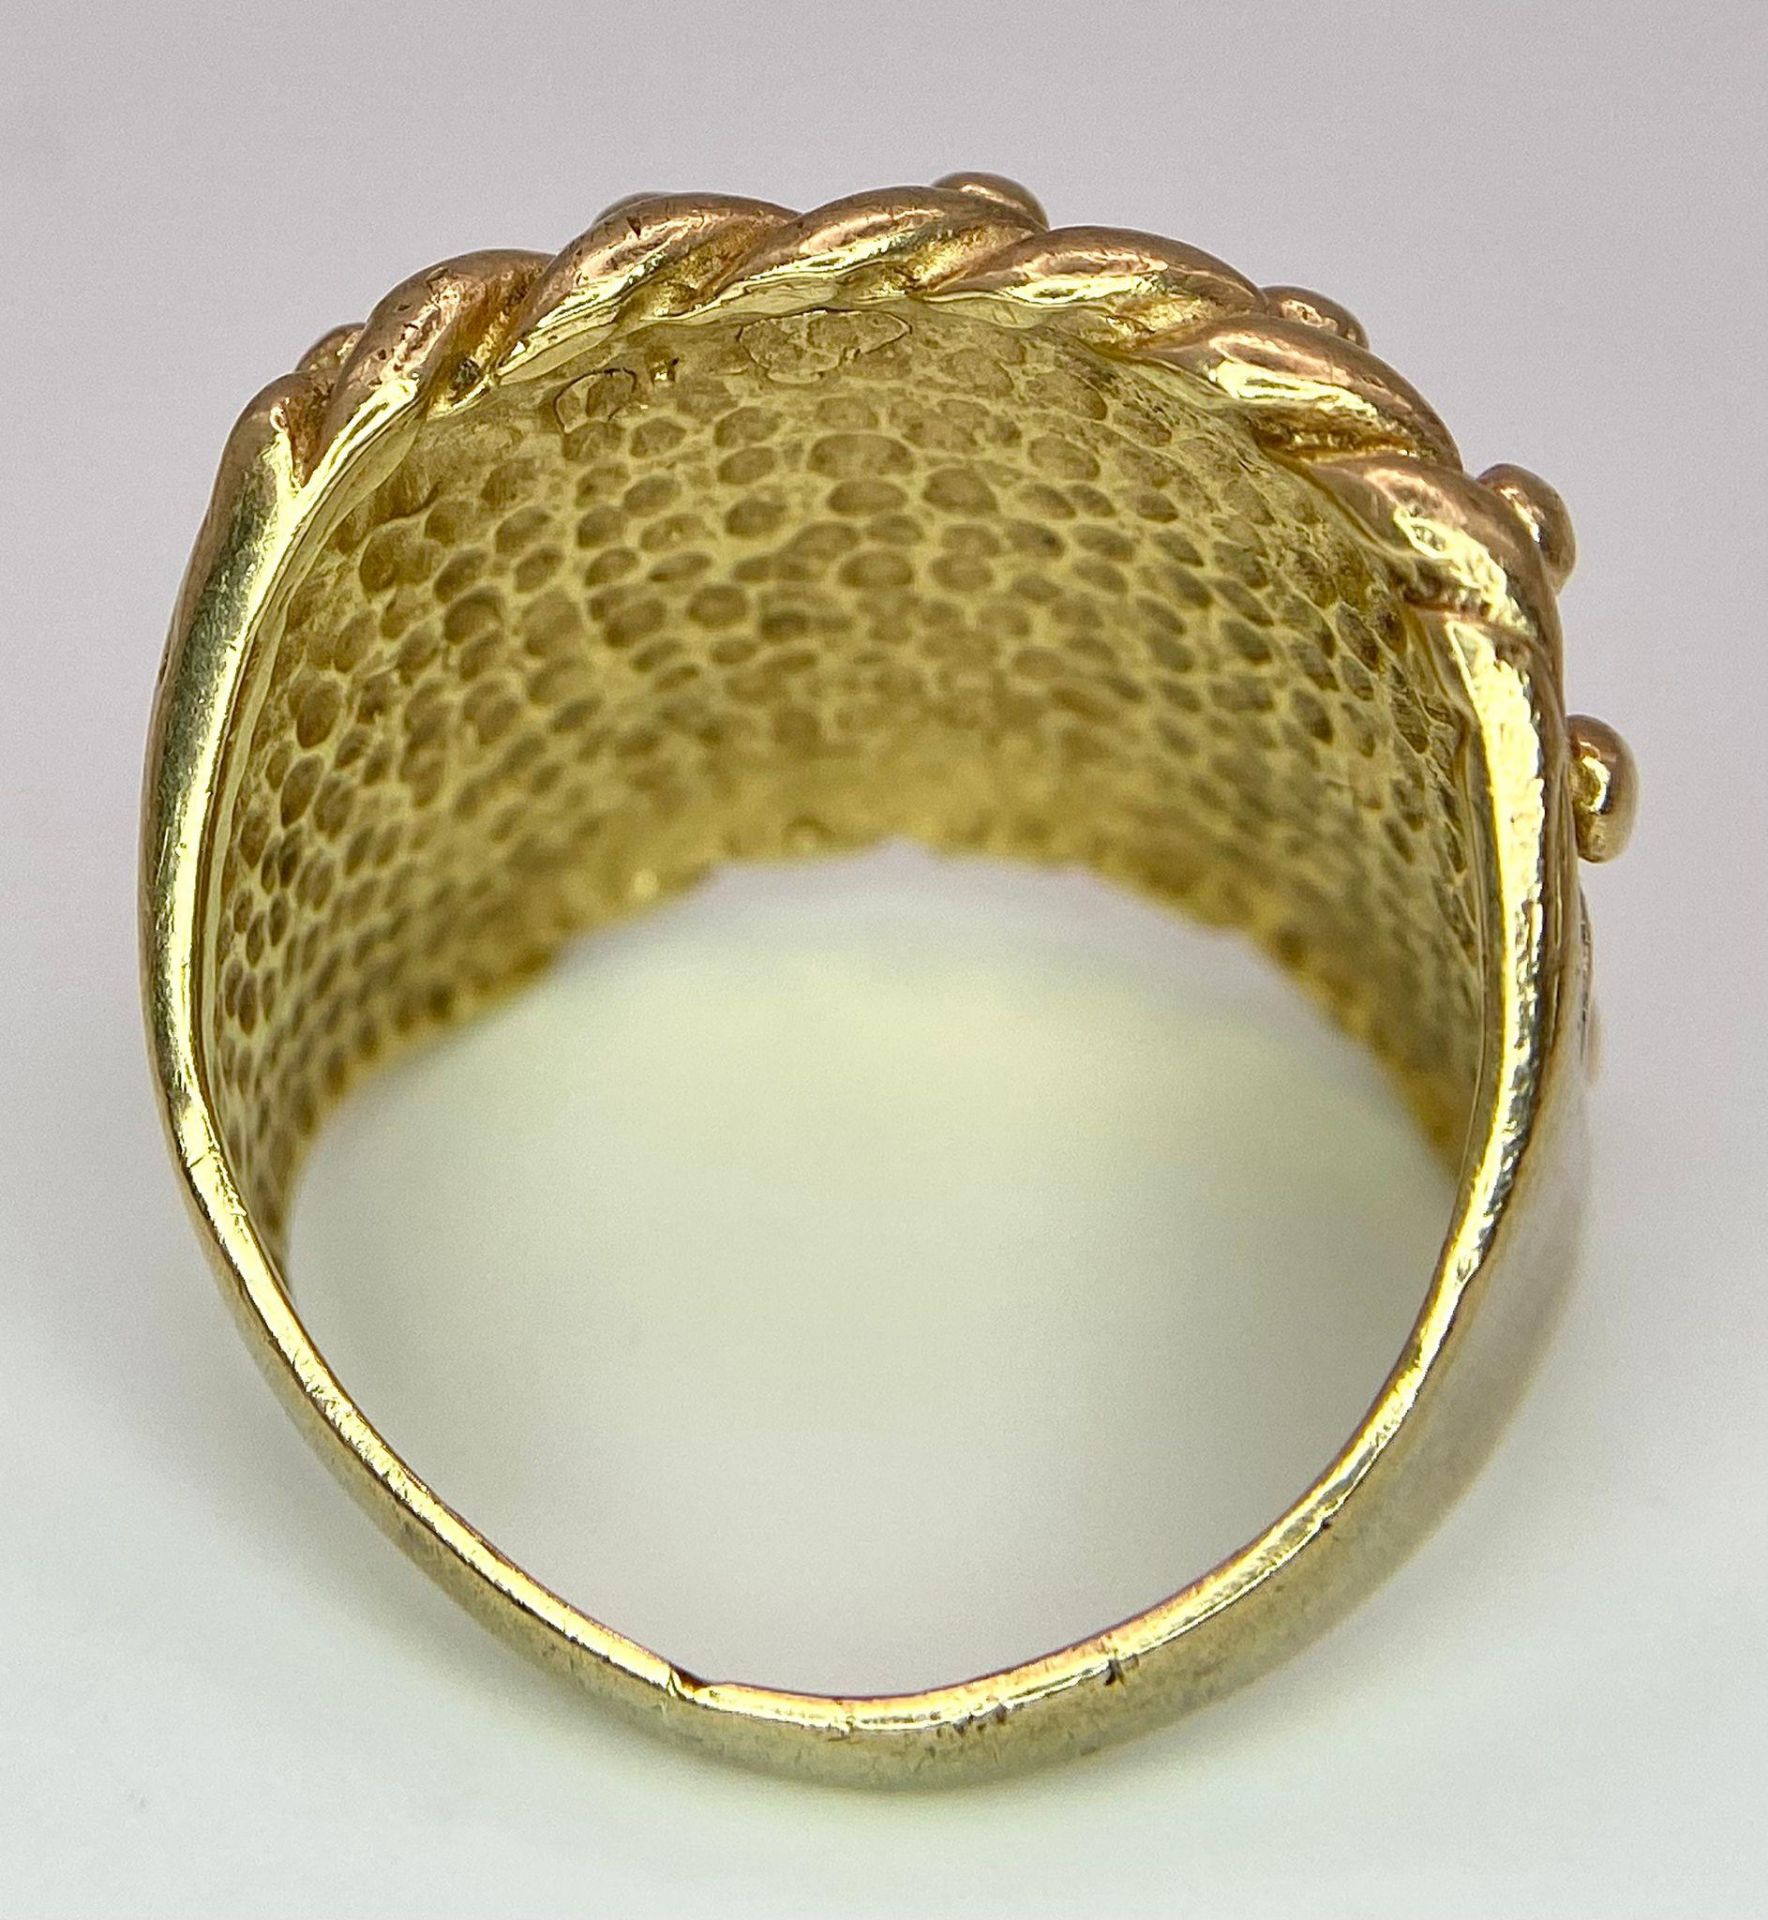 A LARGE AND HEAVY 9K YELLOW GOLD SHOT/KEEPER RING, WEIGHT 13G AND SIZE T - Image 4 of 6